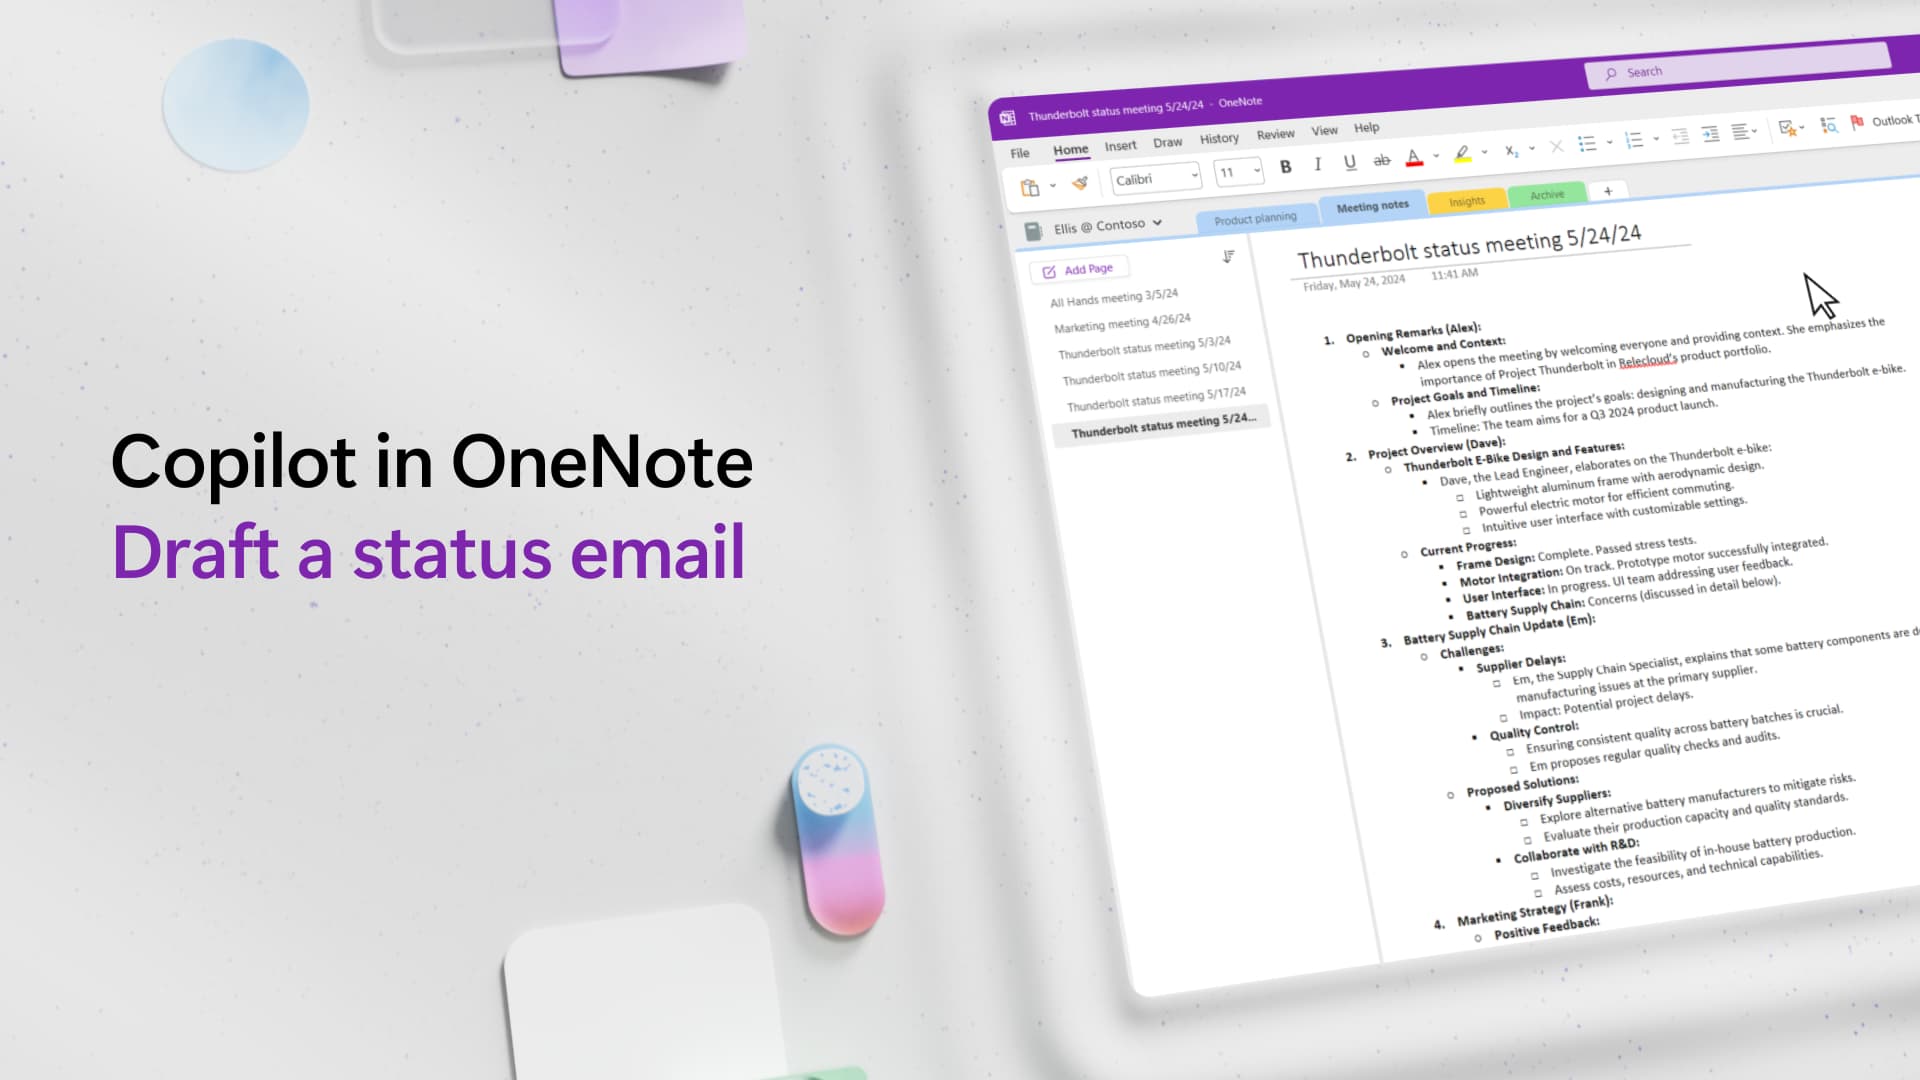 Video: Draft and email with Copilot in OneNote